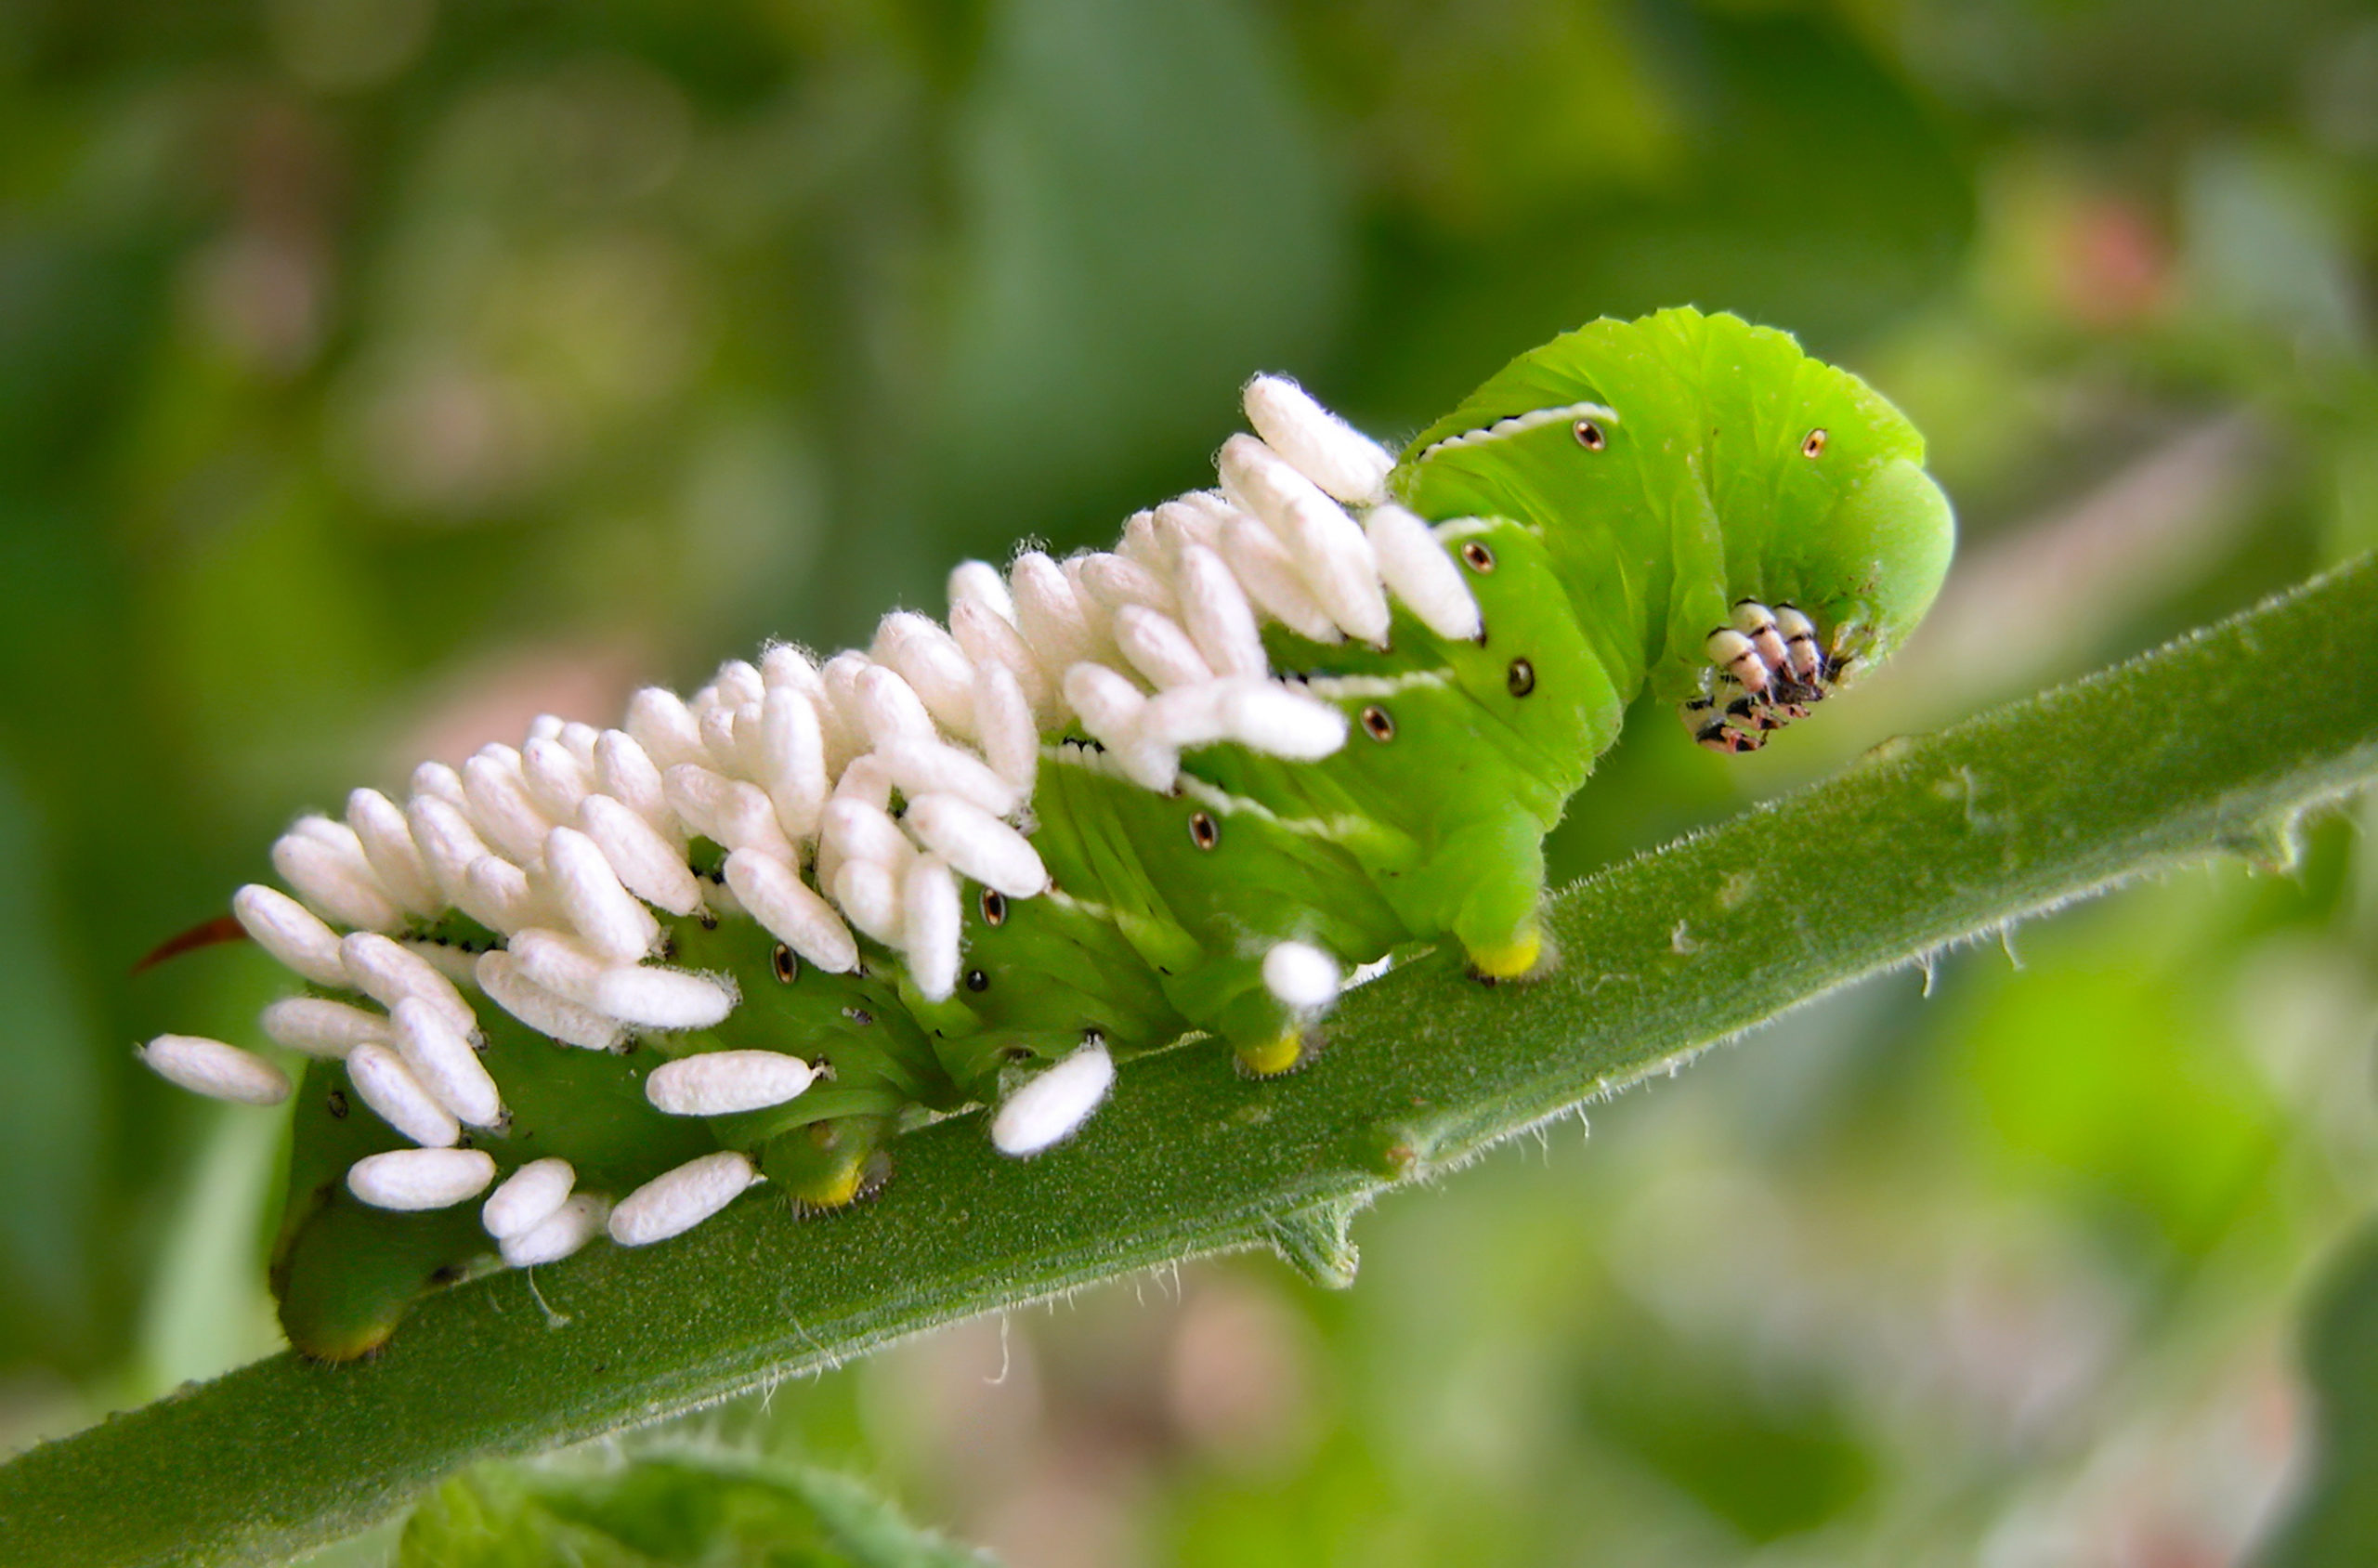 A Tomato Hornworm with wasp eggs. A wasp has injected her eggs into this hornworm. When the eggs hatch into larvae, the caterpillar will be eaten.